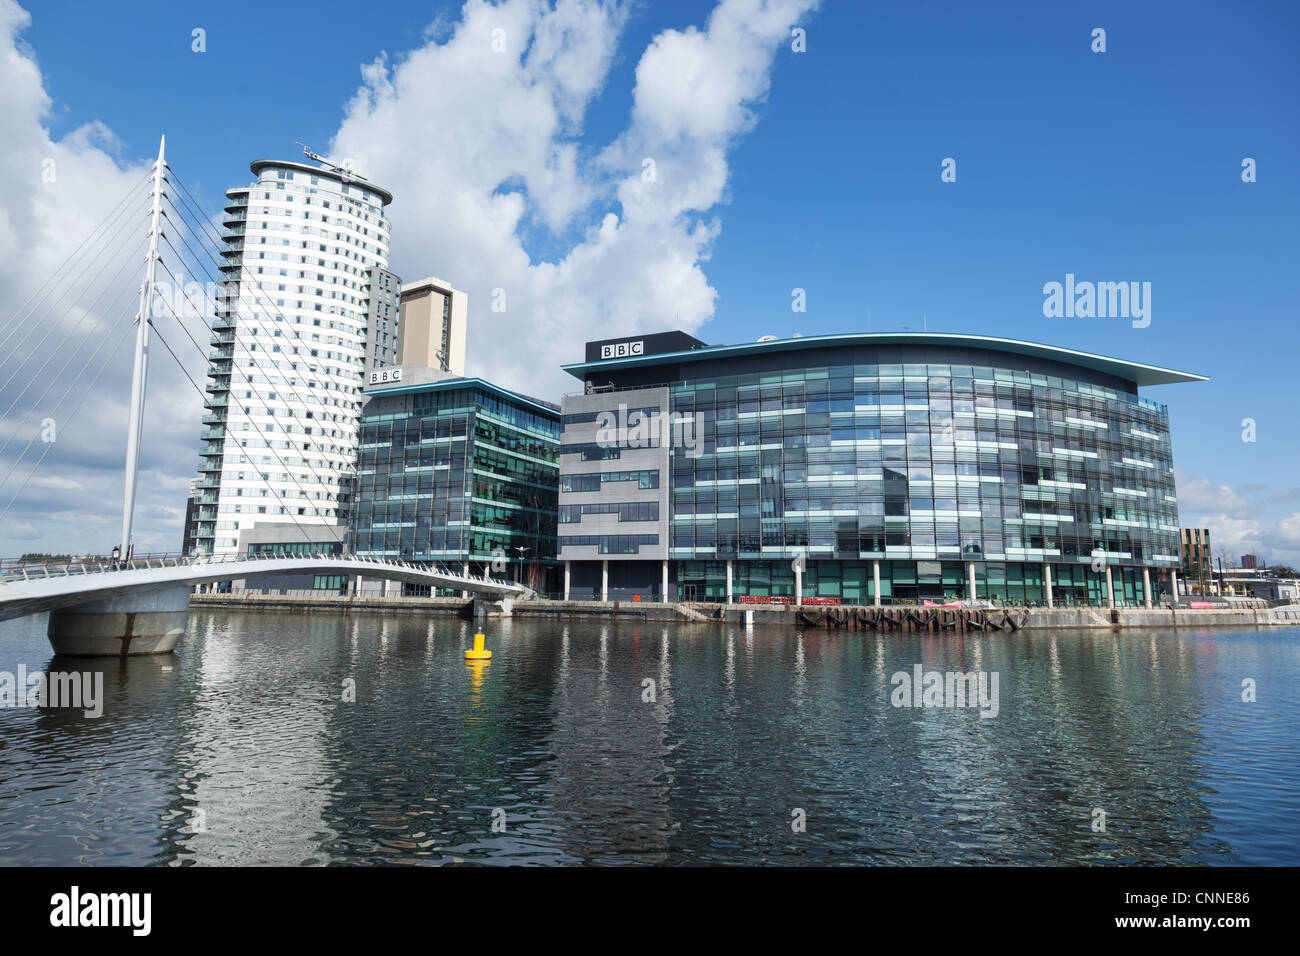 Media City, home to the BBC, at Salford Quays on the Manchester Ship Canal Stock Photo